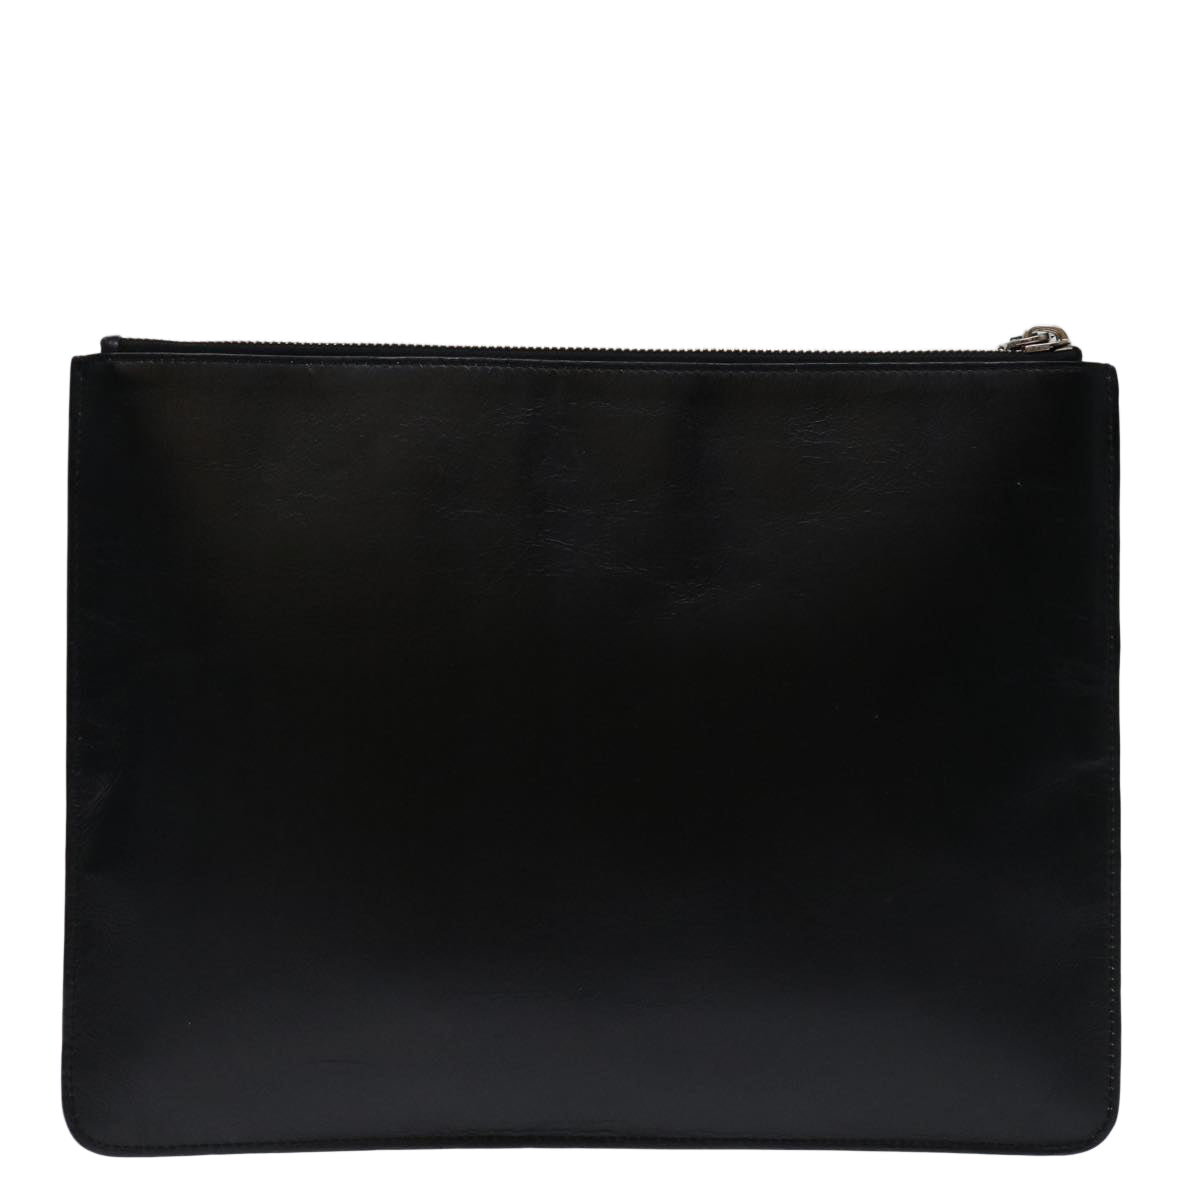 GIVENCHY Clutch Bag Leather Black Auth bs12859 - 0